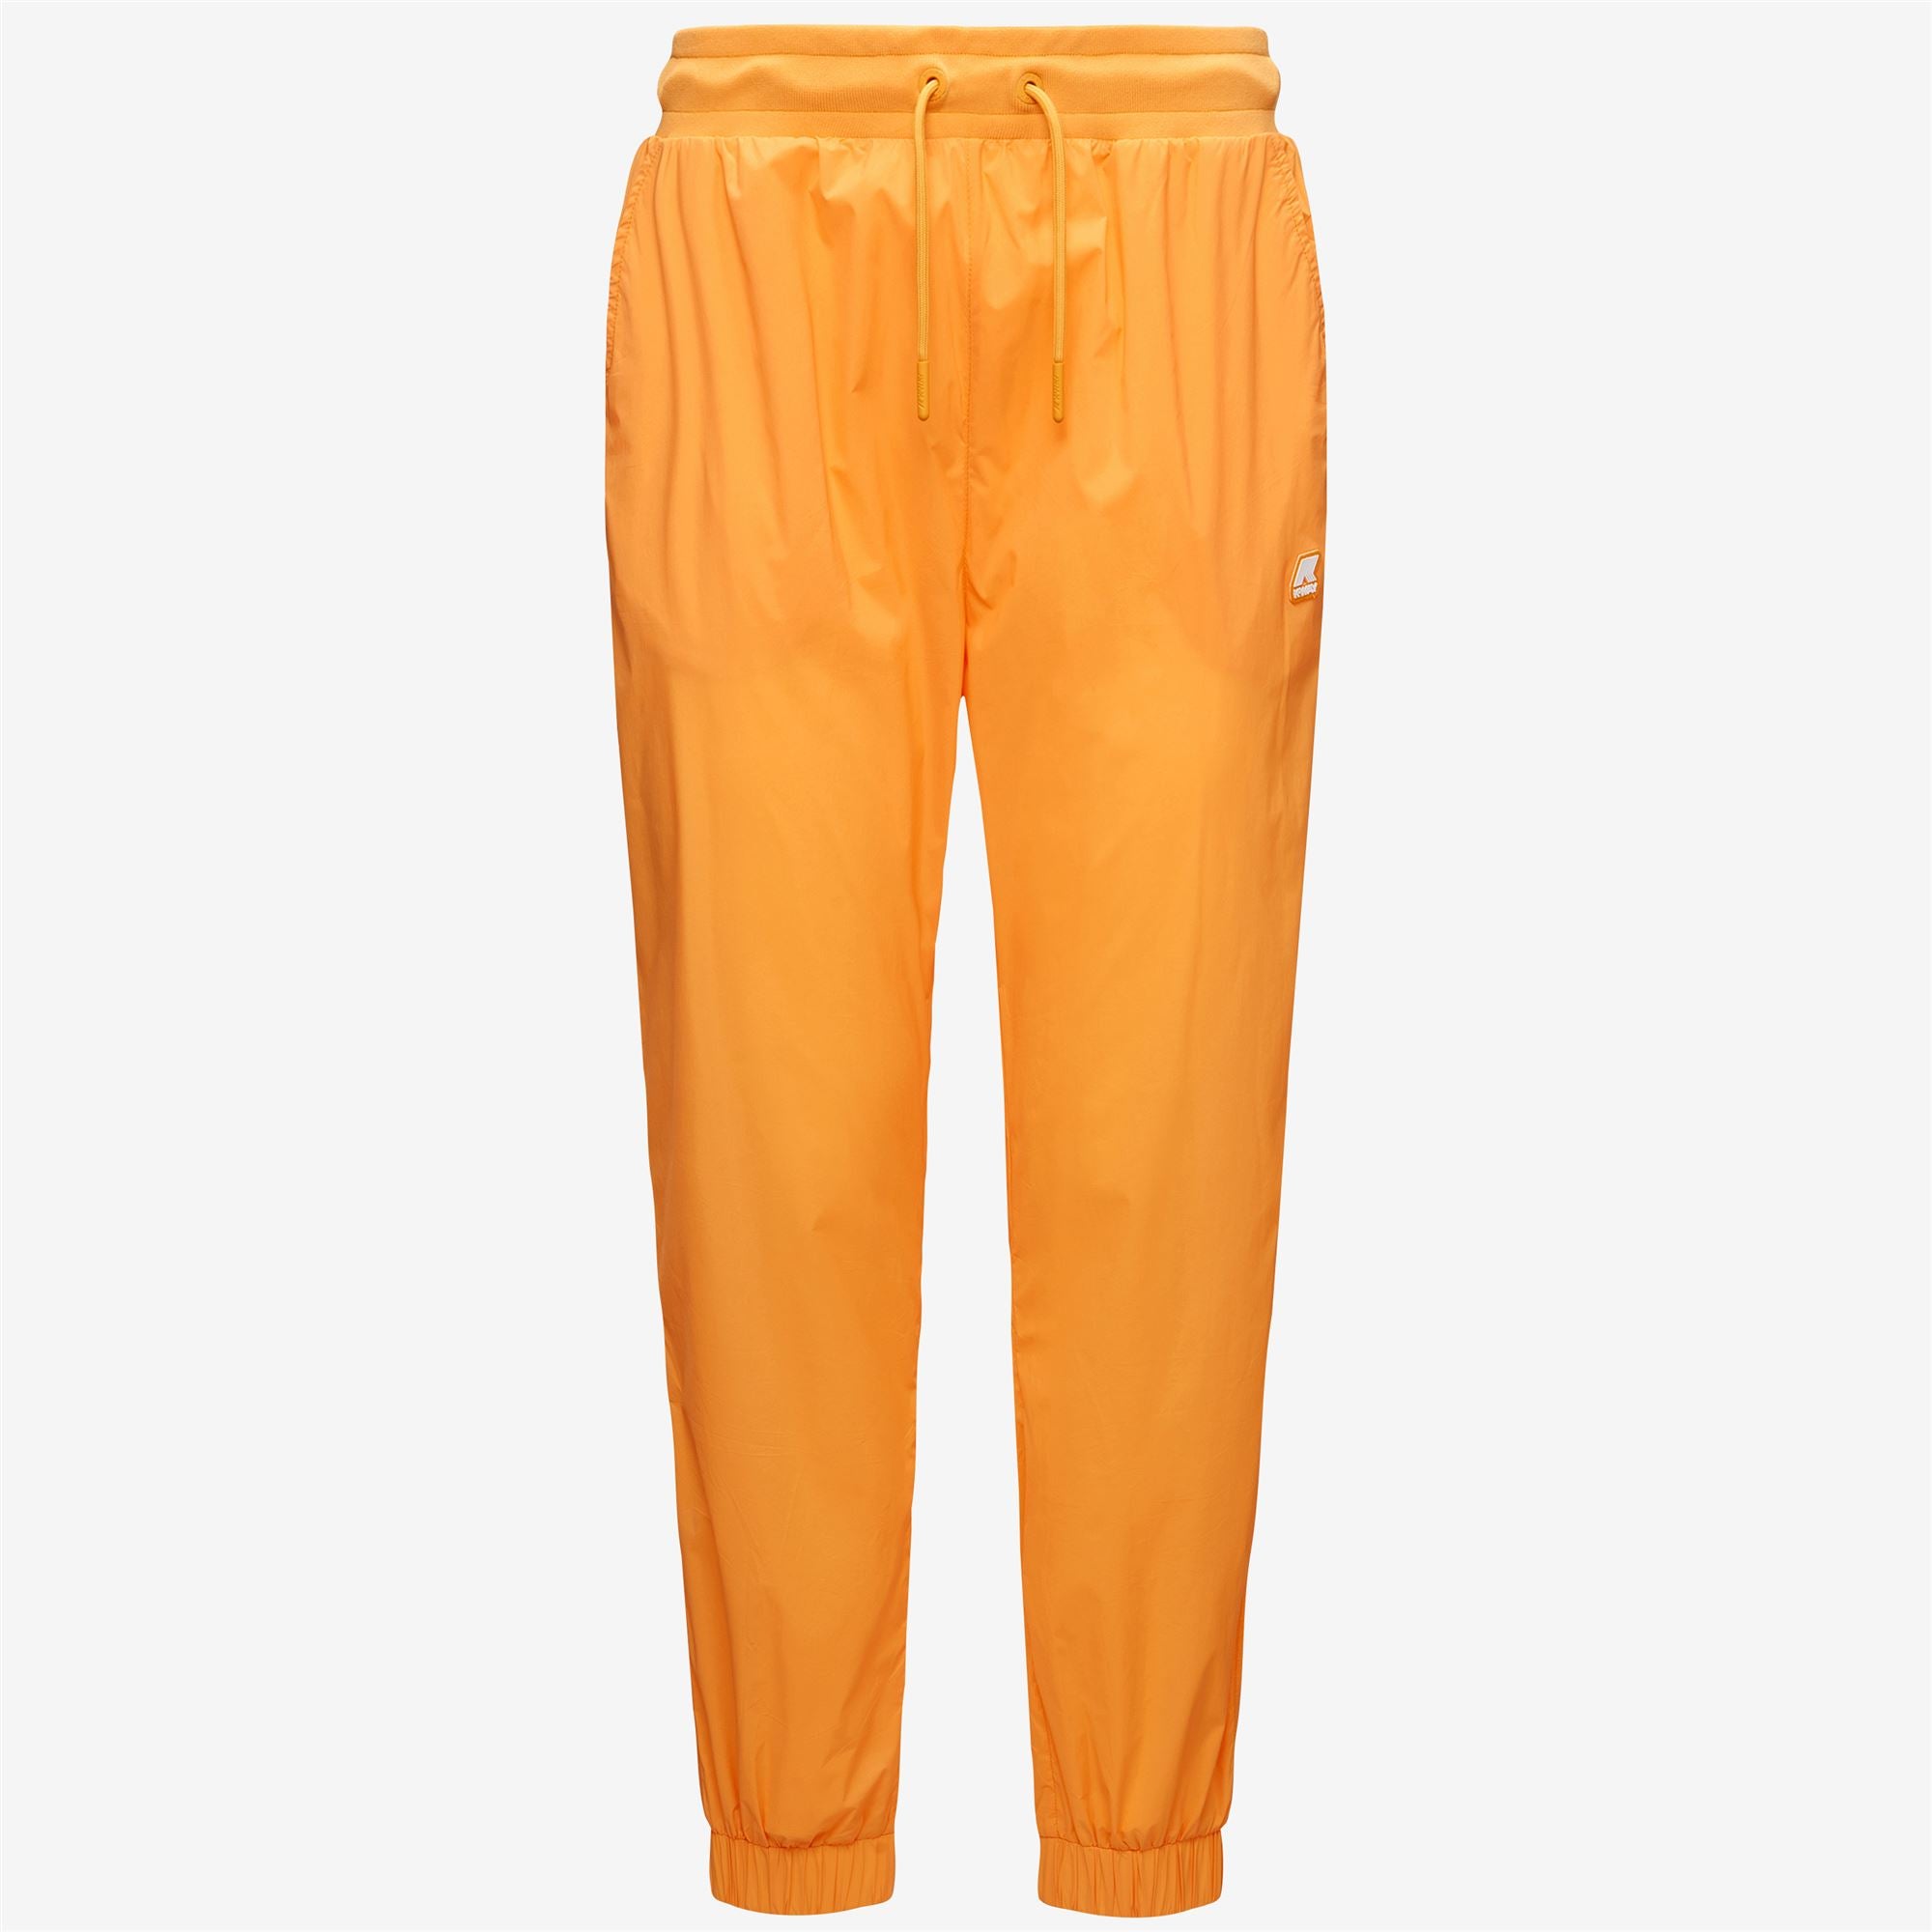 Buy Gold Trousers & Pants for Women by Saffron Threads Online | Ajio.com